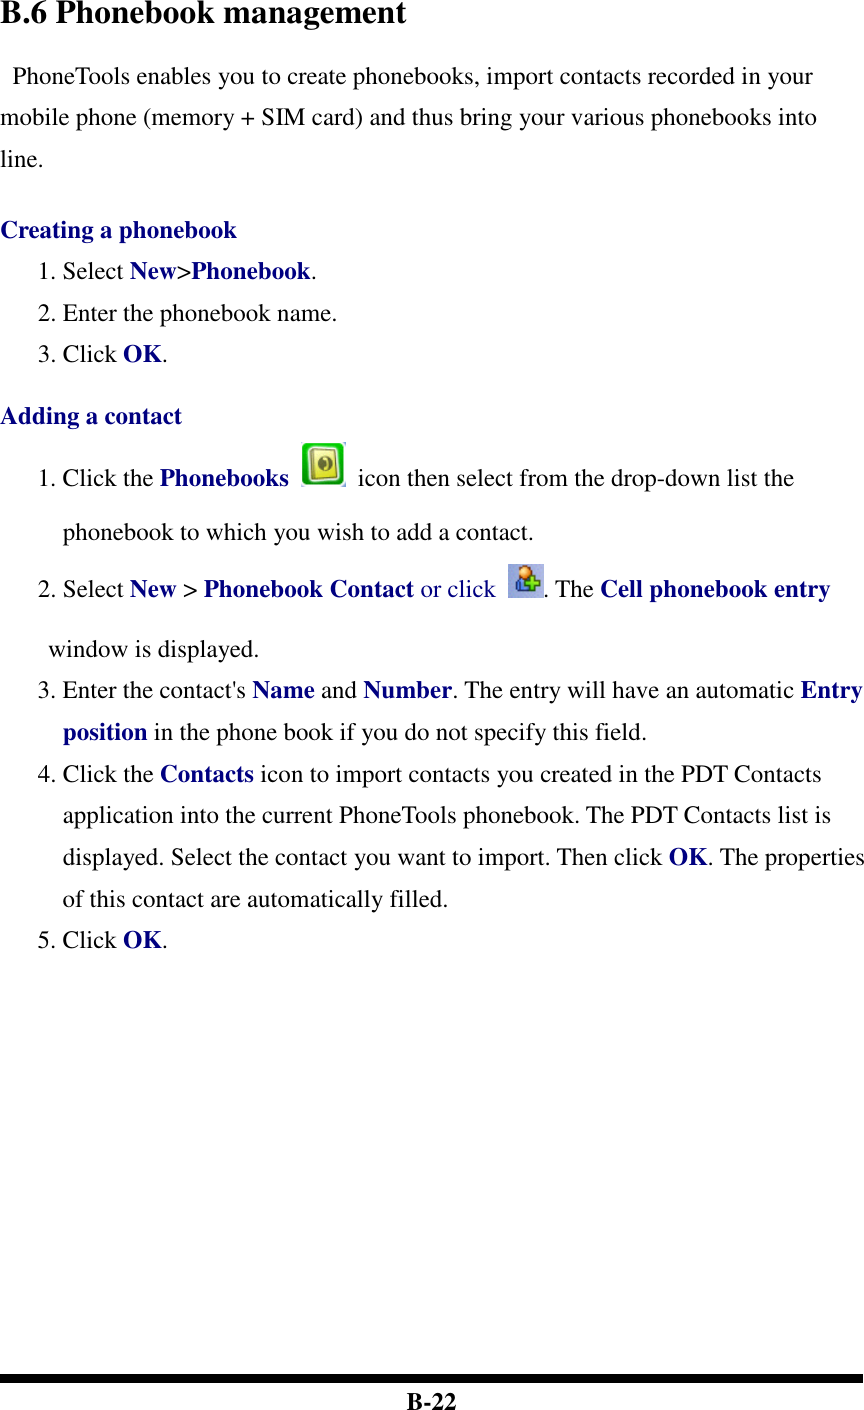  B-22    B.6 Phonebook management   PhoneTools enables you to create phonebooks, import contacts recorded in your mobile phone (memory + SIM card) and thus bring your various phonebooks into line.   Creating a phonebook 1. Select New&gt;Phonebook. 2. Enter the phonebook name. 3. Click OK.    Adding a contact 1. Click the Phonebooks    icon then select from the drop-down list the phonebook to which you wish to add a contact.   2. Select New &gt; Phonebook Contact or click . The Cell phonebook entry window is displayed. 3. Enter the contact&apos;s Name and Number. The entry will have an automatic Entry position in the phone book if you do not specify this field.   4. Click the Contacts icon to import contacts you created in the PDT Contacts application into the current PhoneTools phonebook. The PDT Contacts list is displayed. Select the contact you want to import. Then click OK. The properties of this contact are automatically filled.   5. Click OK.    